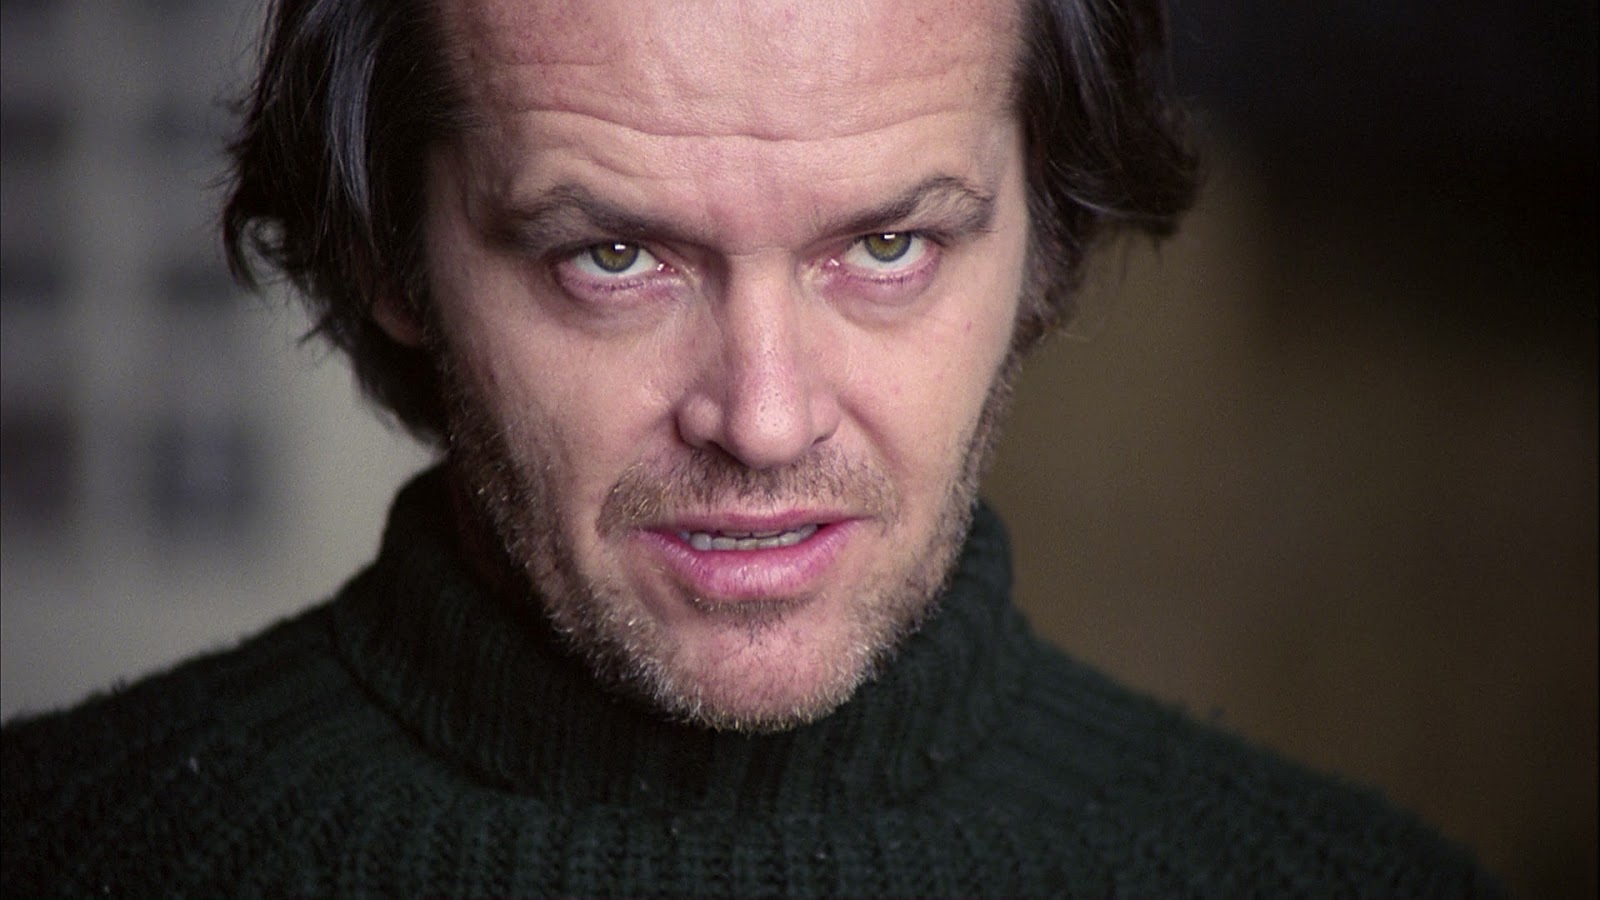 video review : The Shining